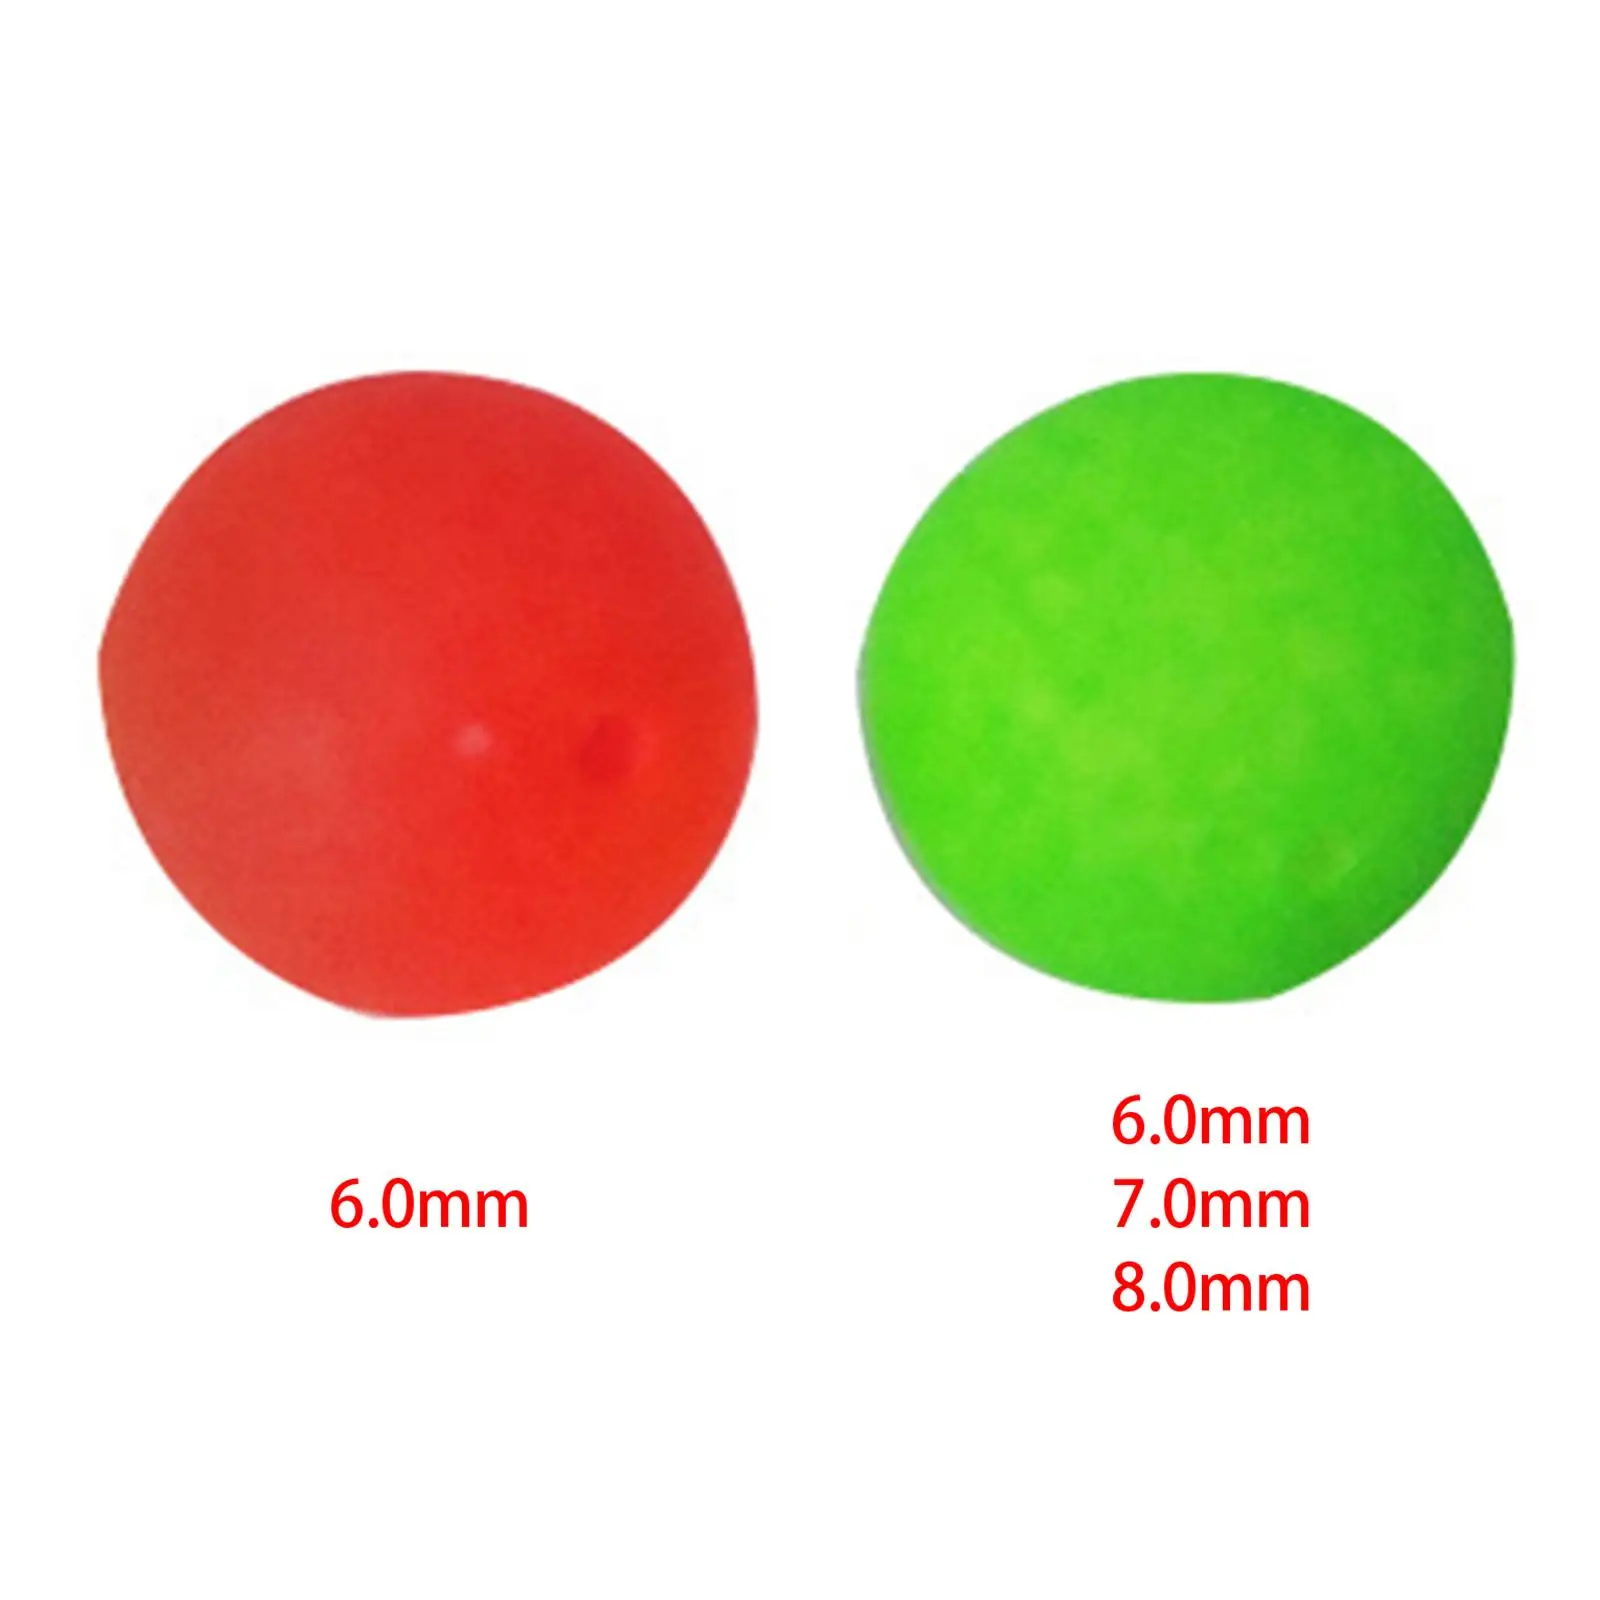 100 Pieces Fishing Floating Bobber Fishing Bobbers Bright Color Fishing Accessories Foam Strike Indicator Bite Fishing Float